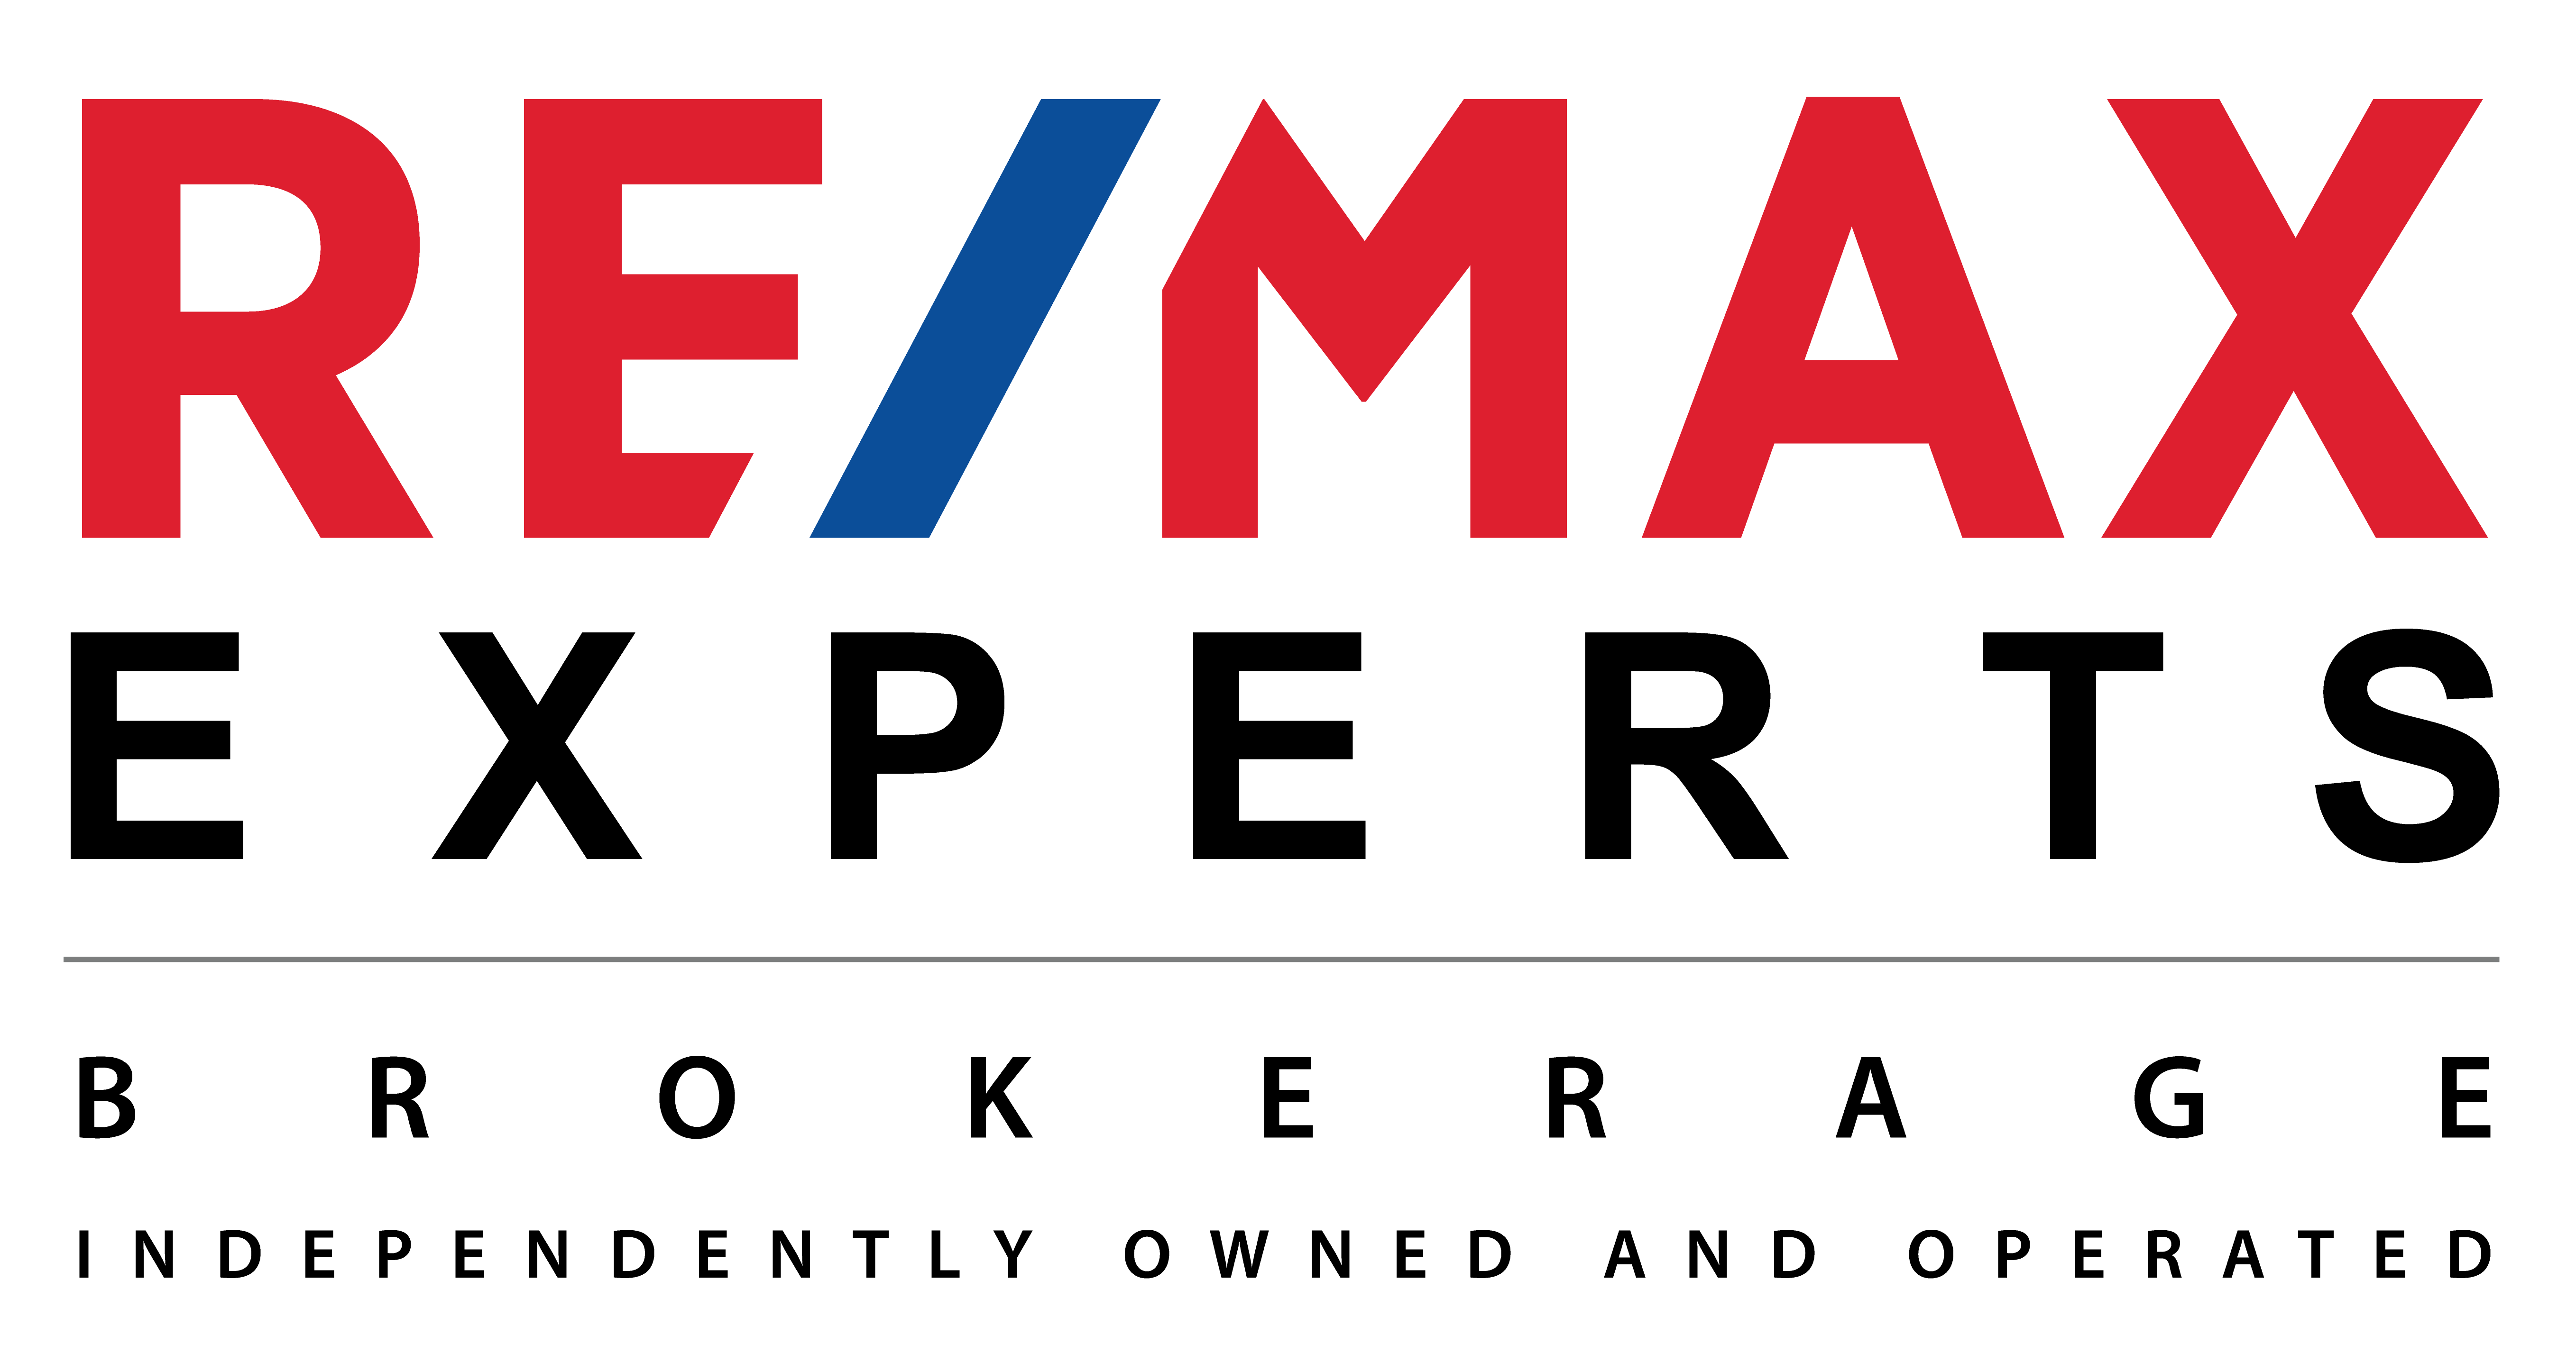 remax,west,contact,us,home,vaughan,buying,selling,sales,sale,woodbridge